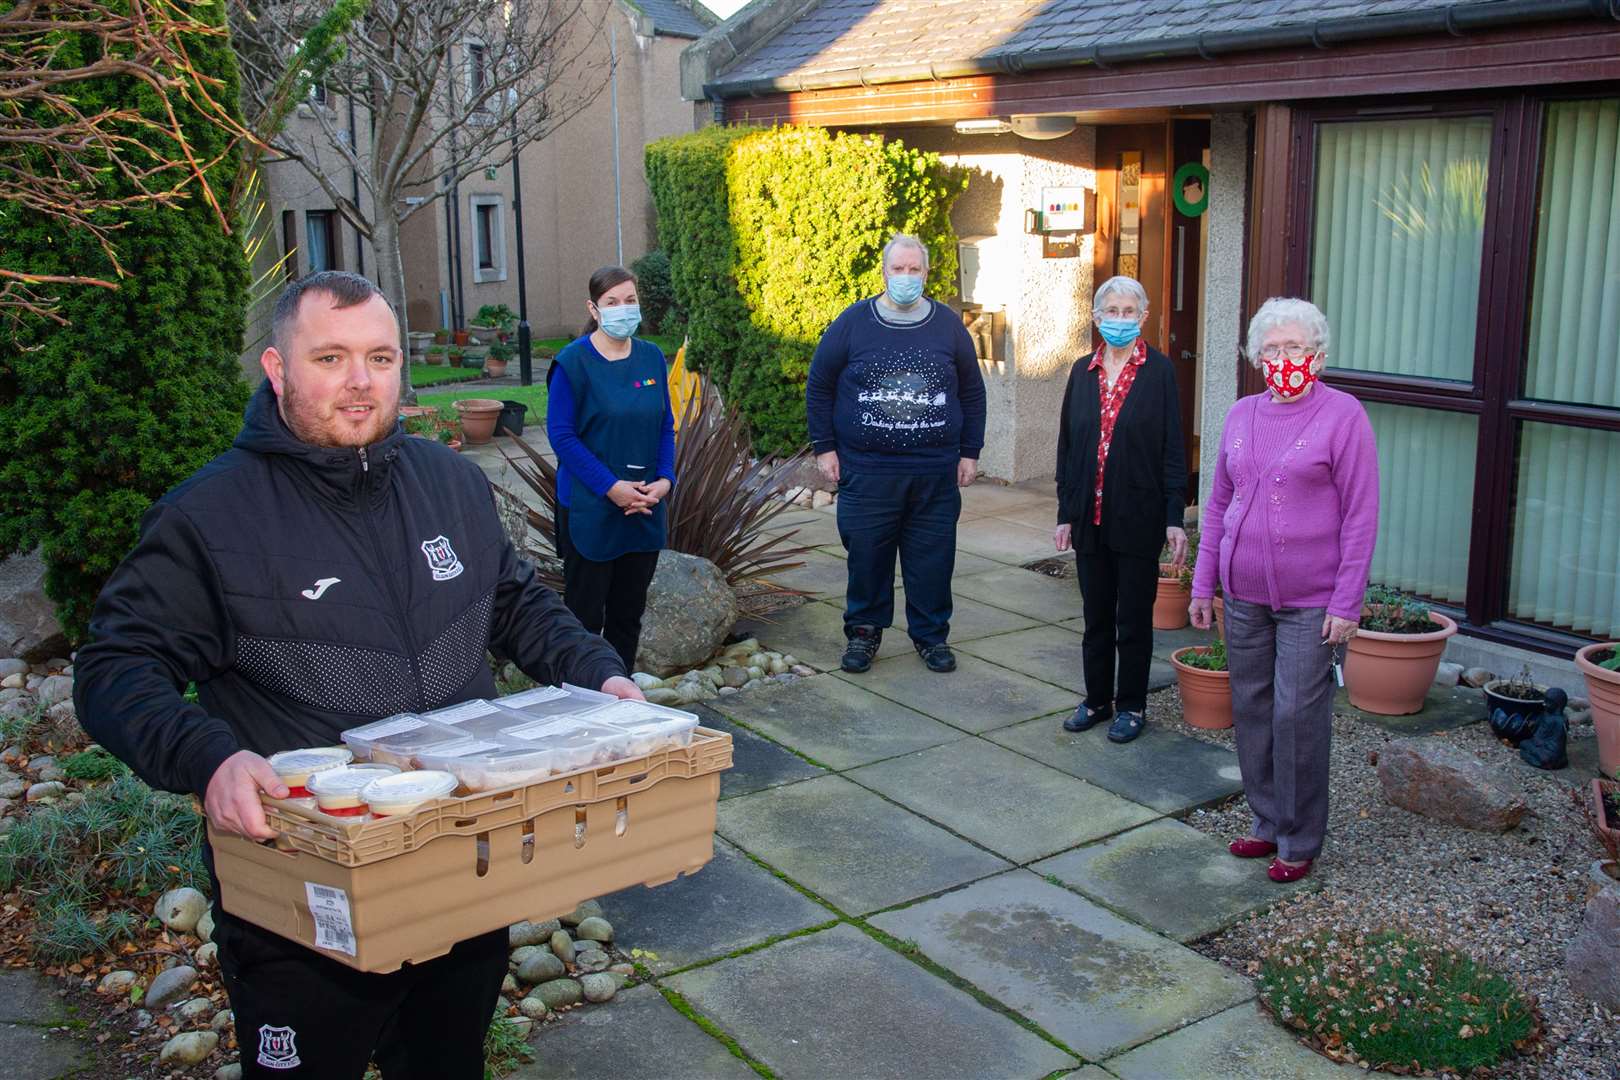 Elgin City's Craigh Stewart delivers to staff and residents at Netherport in Elgin...Elgin City FC, along with TESCO Elgin and Guidi's in Lossiemouth, hand out 130 three course meals to sheltered housing in the community...Picture: Daniel Forsyth..